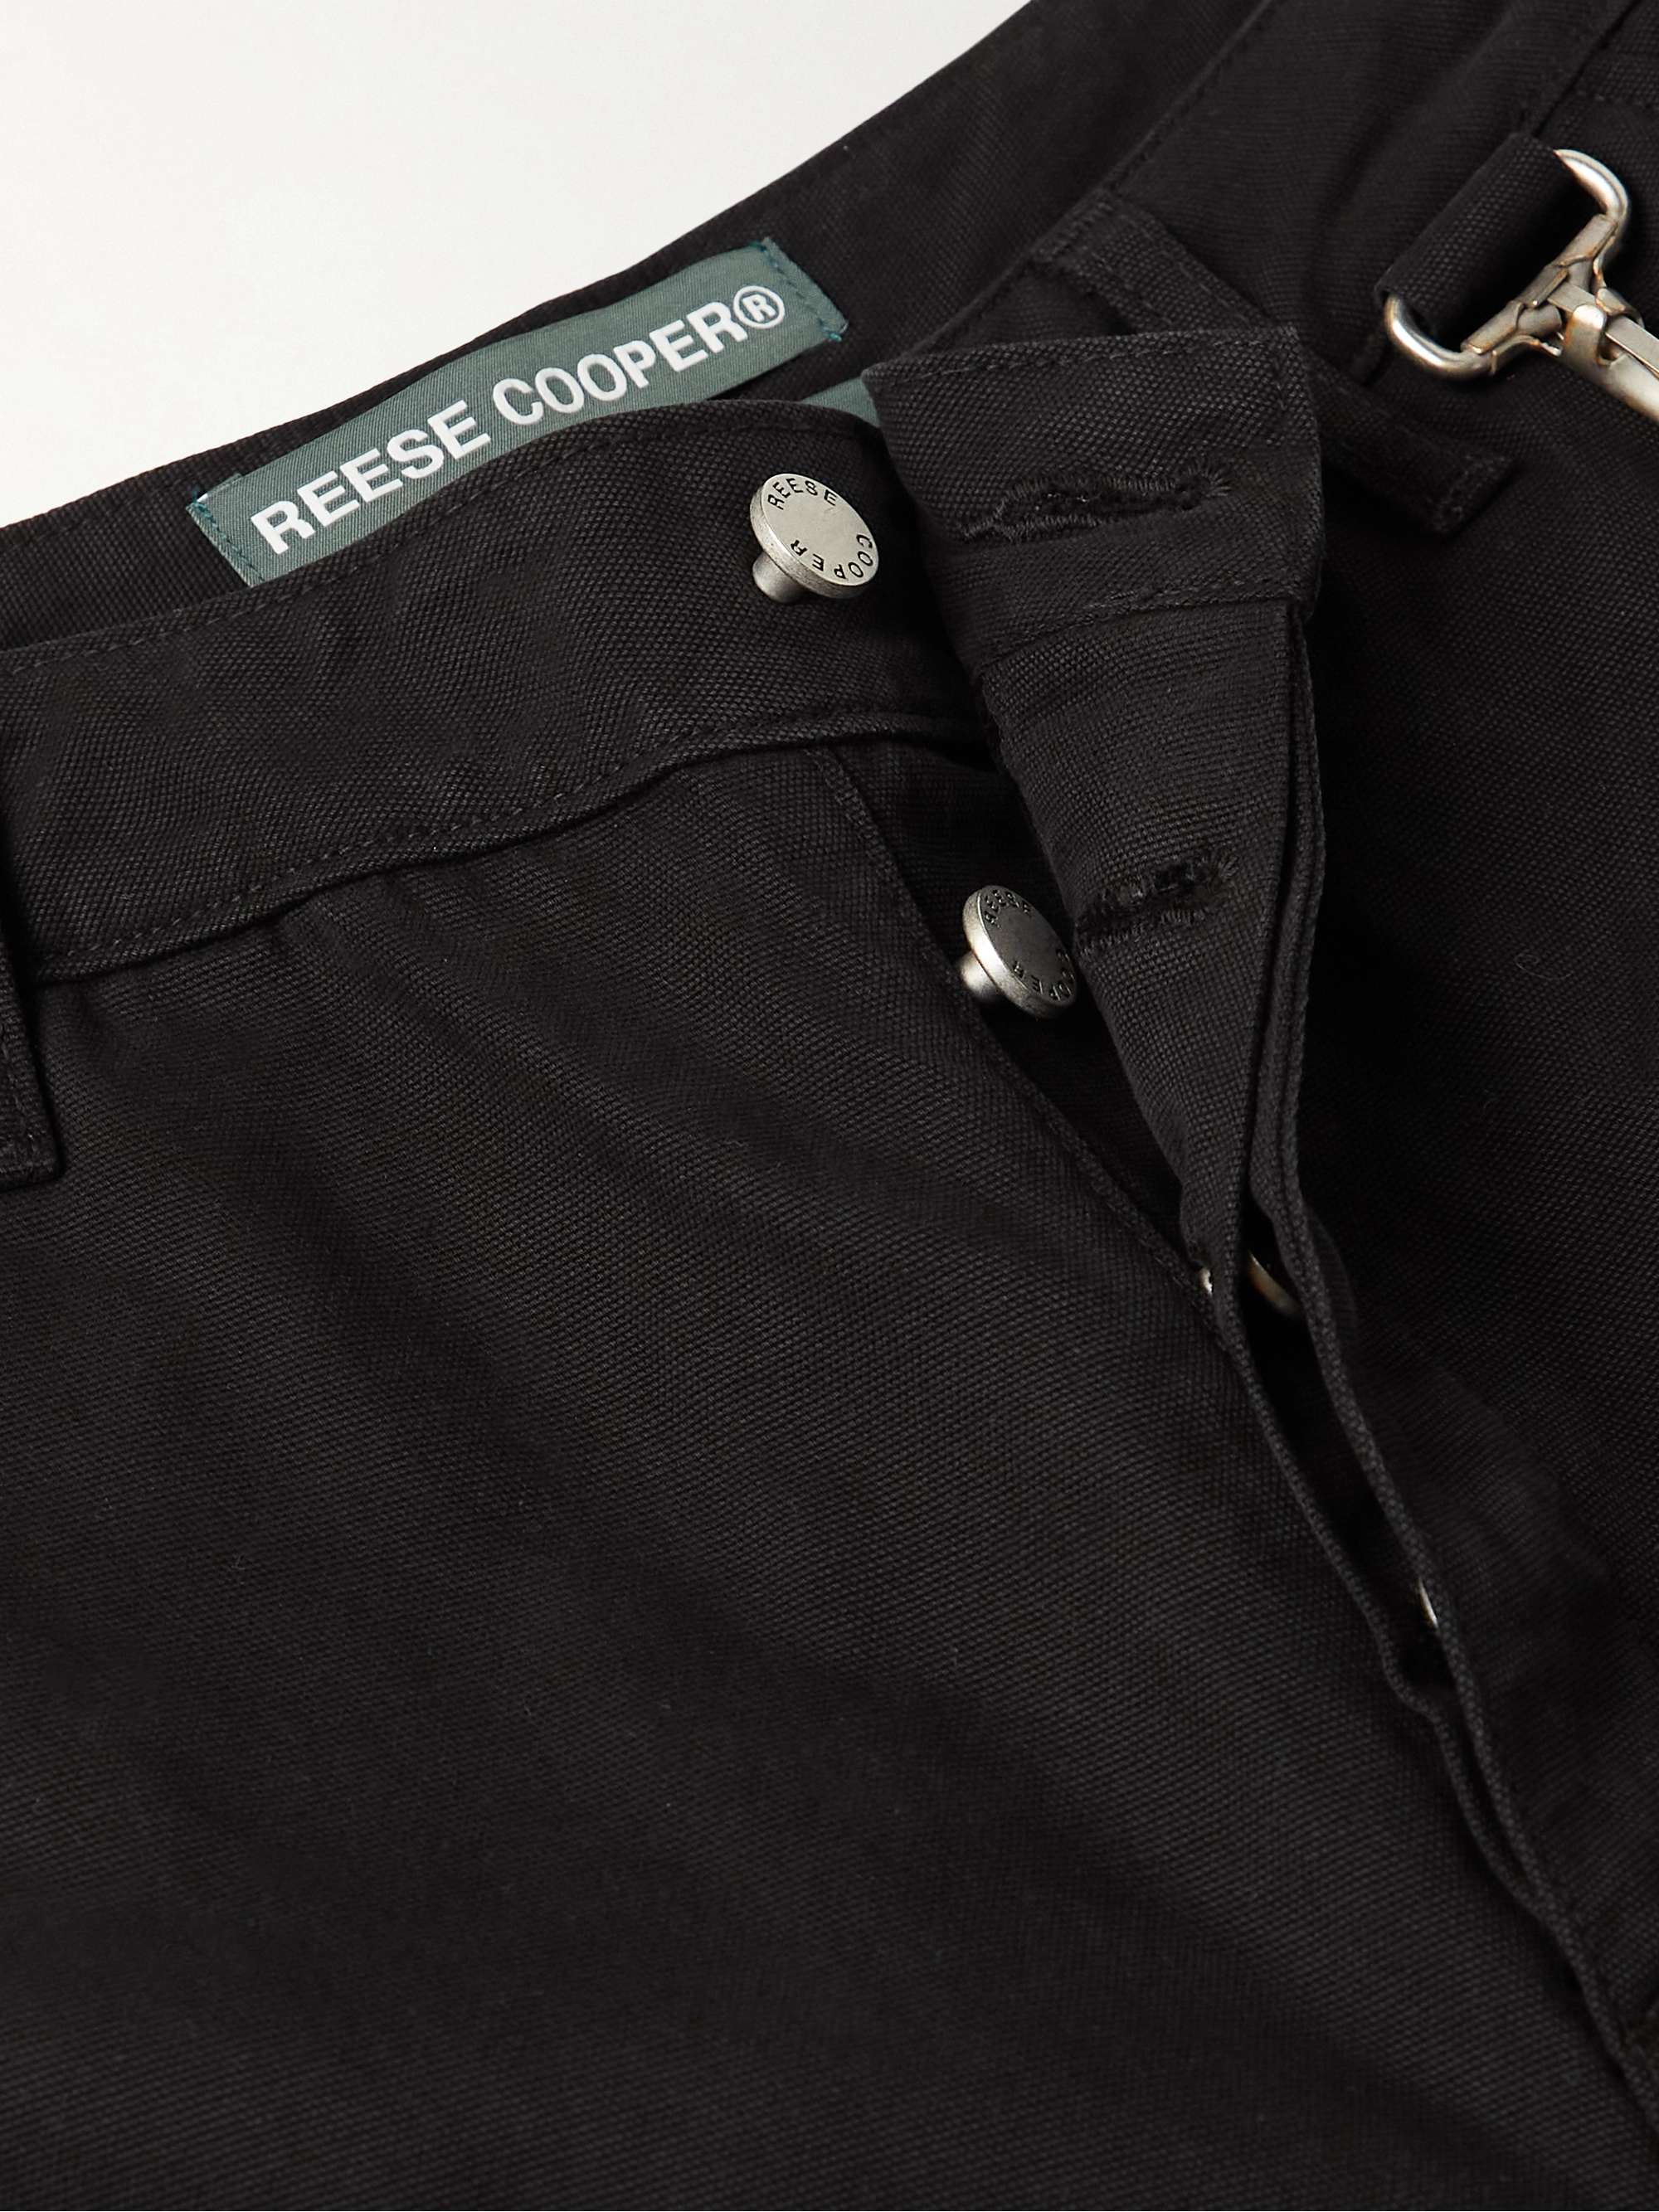 REESE COOPER® Straight-Leg Cotton-Canvas Cargo Trousers